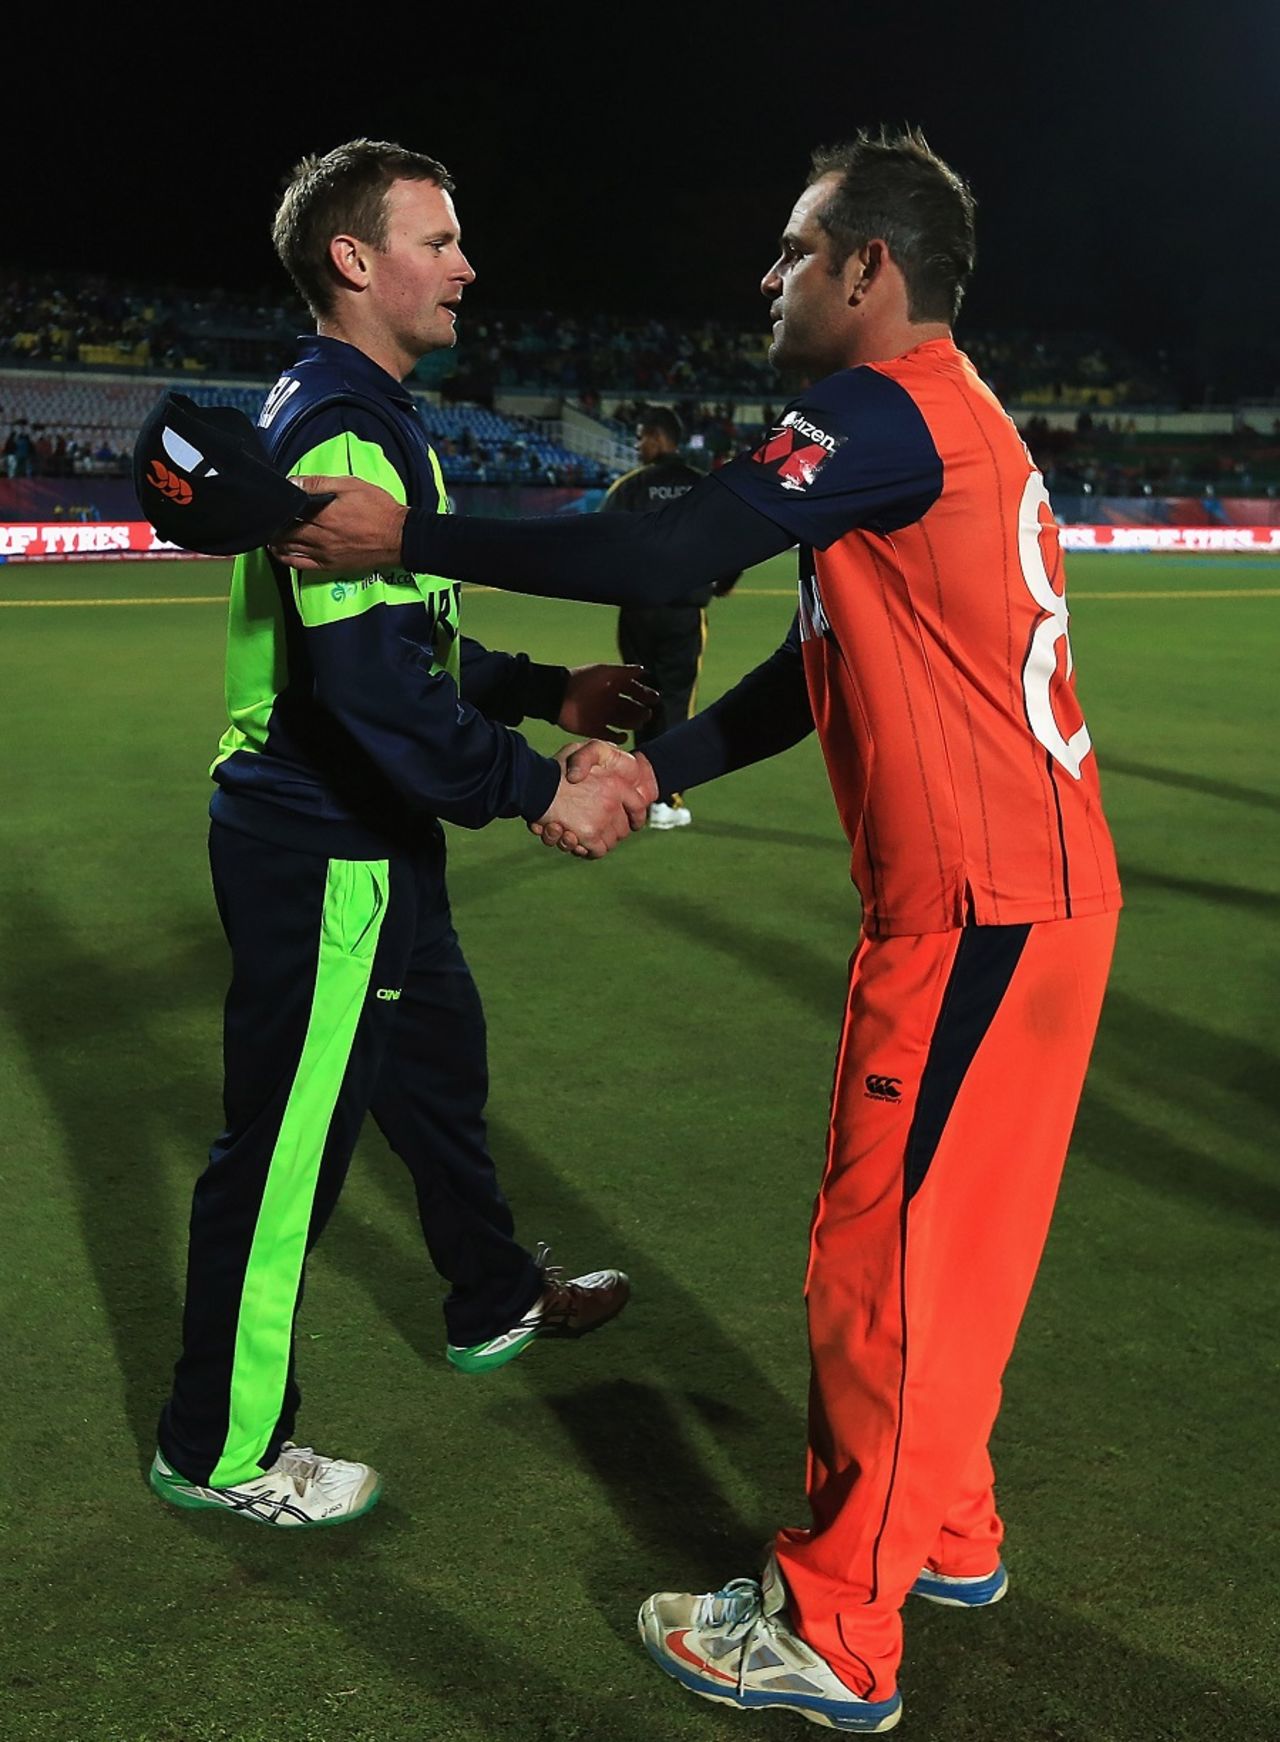 Peter Borren and William Porterfield shake hands after the match, Ireland v Netherlands, World T20 qualifiers, Group A, Dharamsala, March 13, 2016